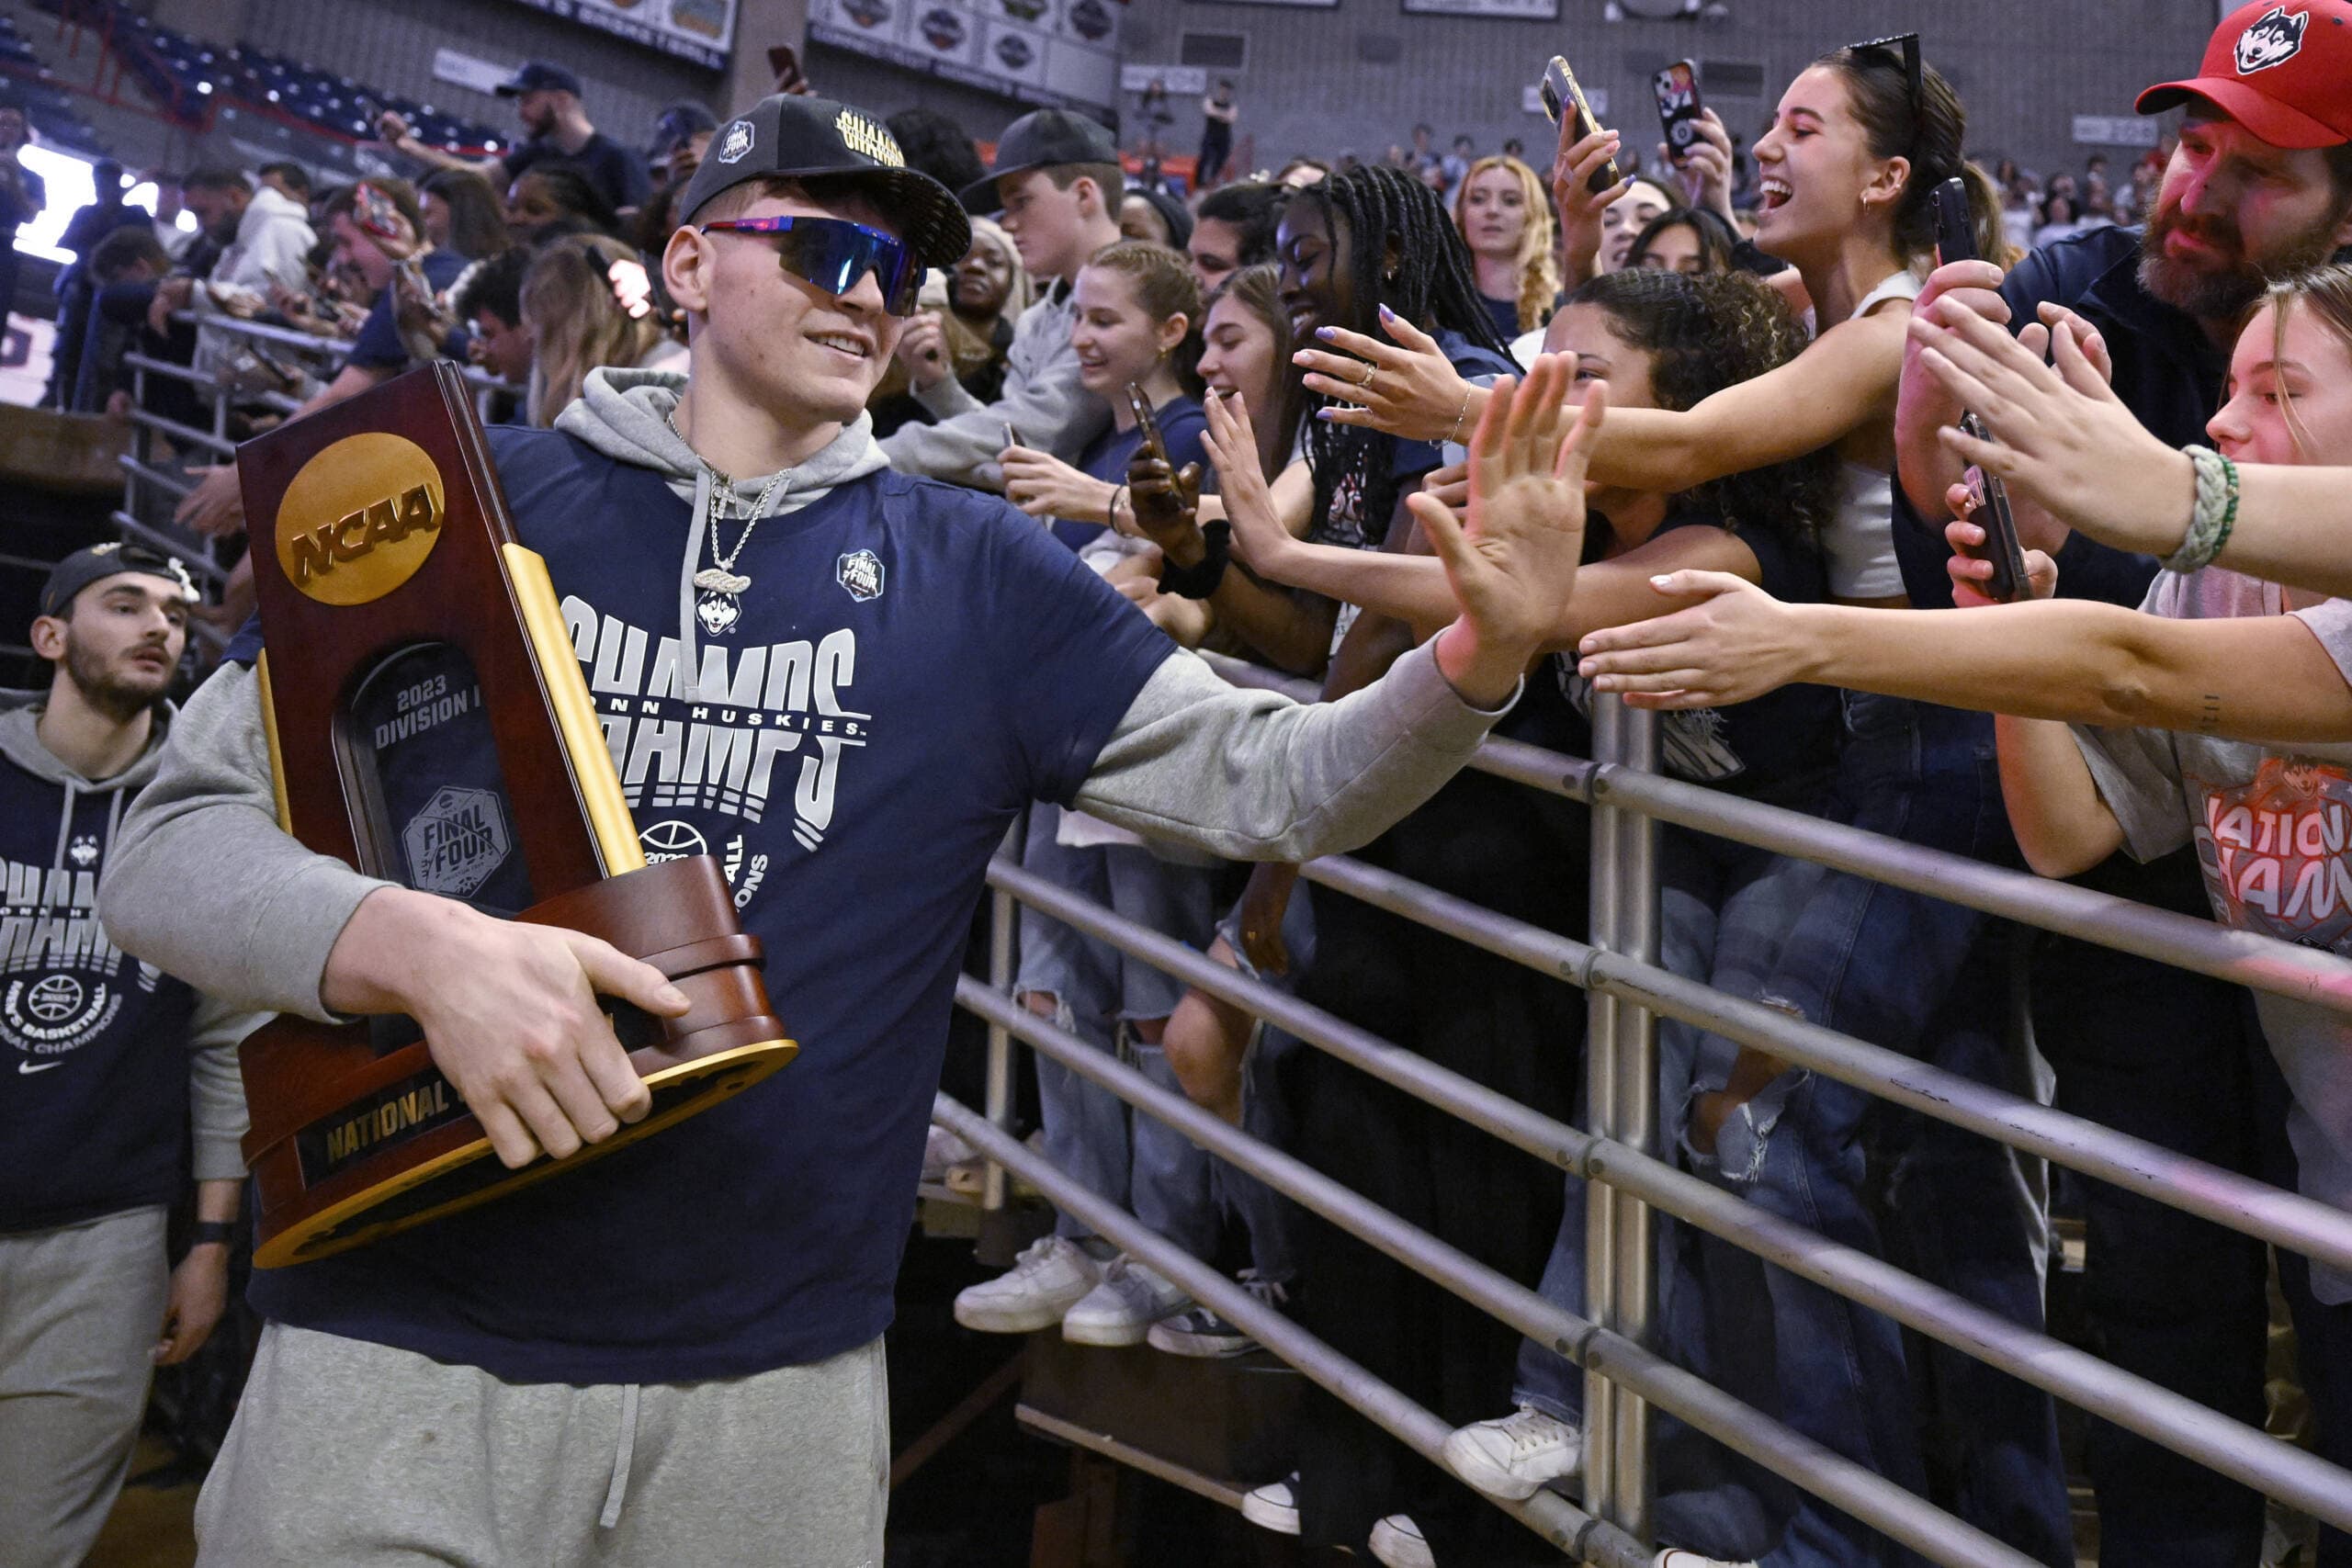 UConn's Donovan Clingan is greeted by fans as the team arrives for a rally at Gampel Pavilion in honor of UConn's NCAA men's Division I basketball championship, April 4, in Storrs, Conn. (Jessica Hill/AP)